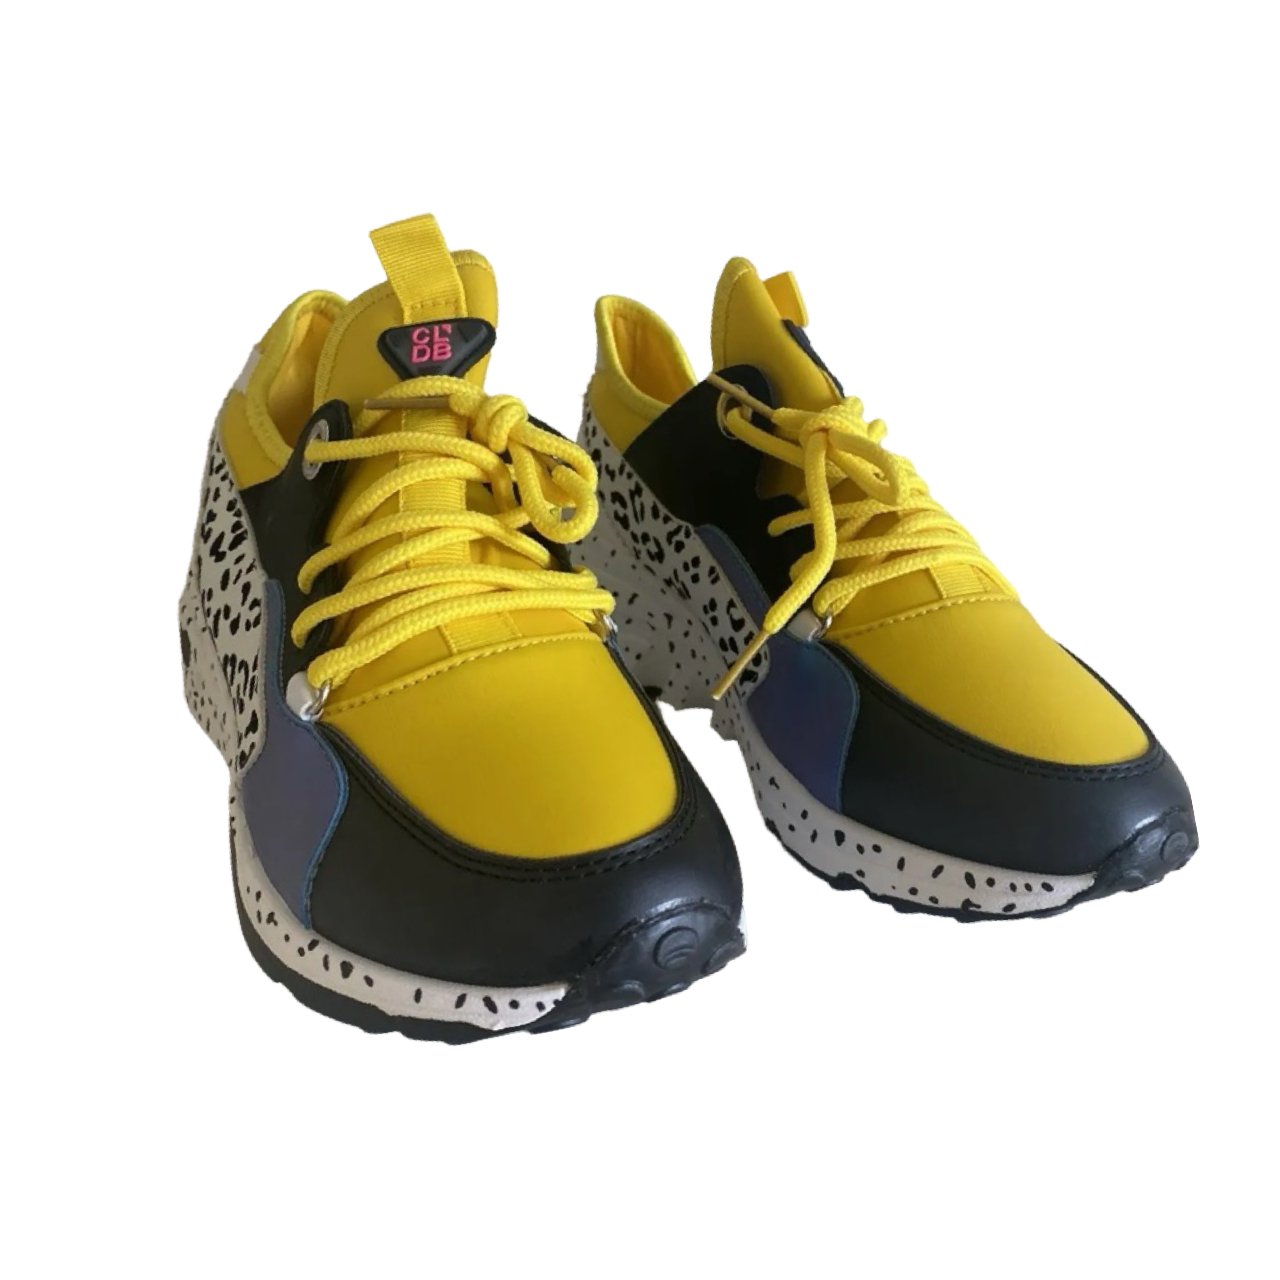 Colourful Women Trainers with Platforms in Yellow - Soul and Sense Streetwear